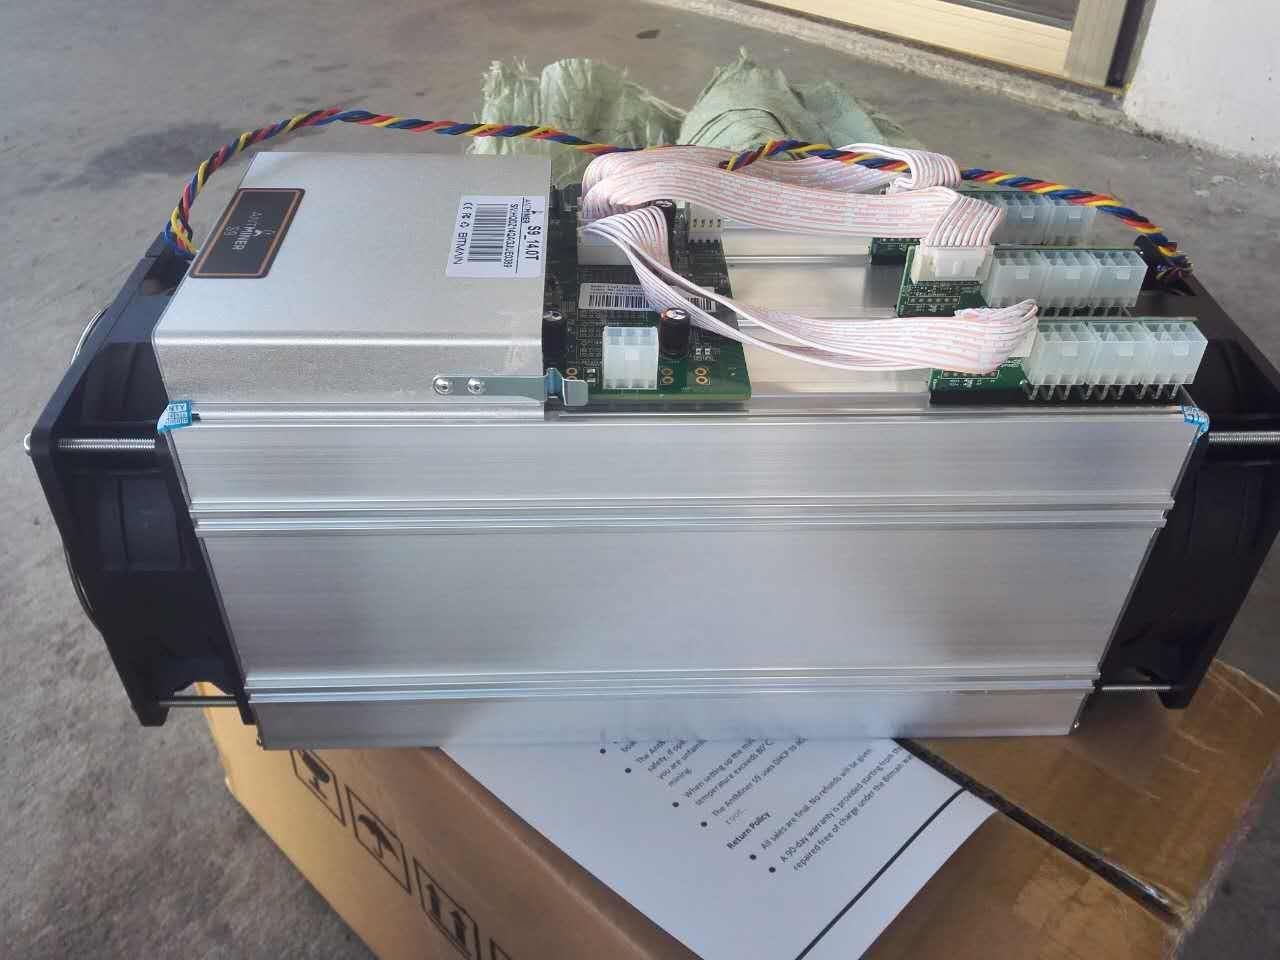 Antminer S9 ~13.5TH/s @. 098W/GH 16nm ASIC Bitcoin Miner